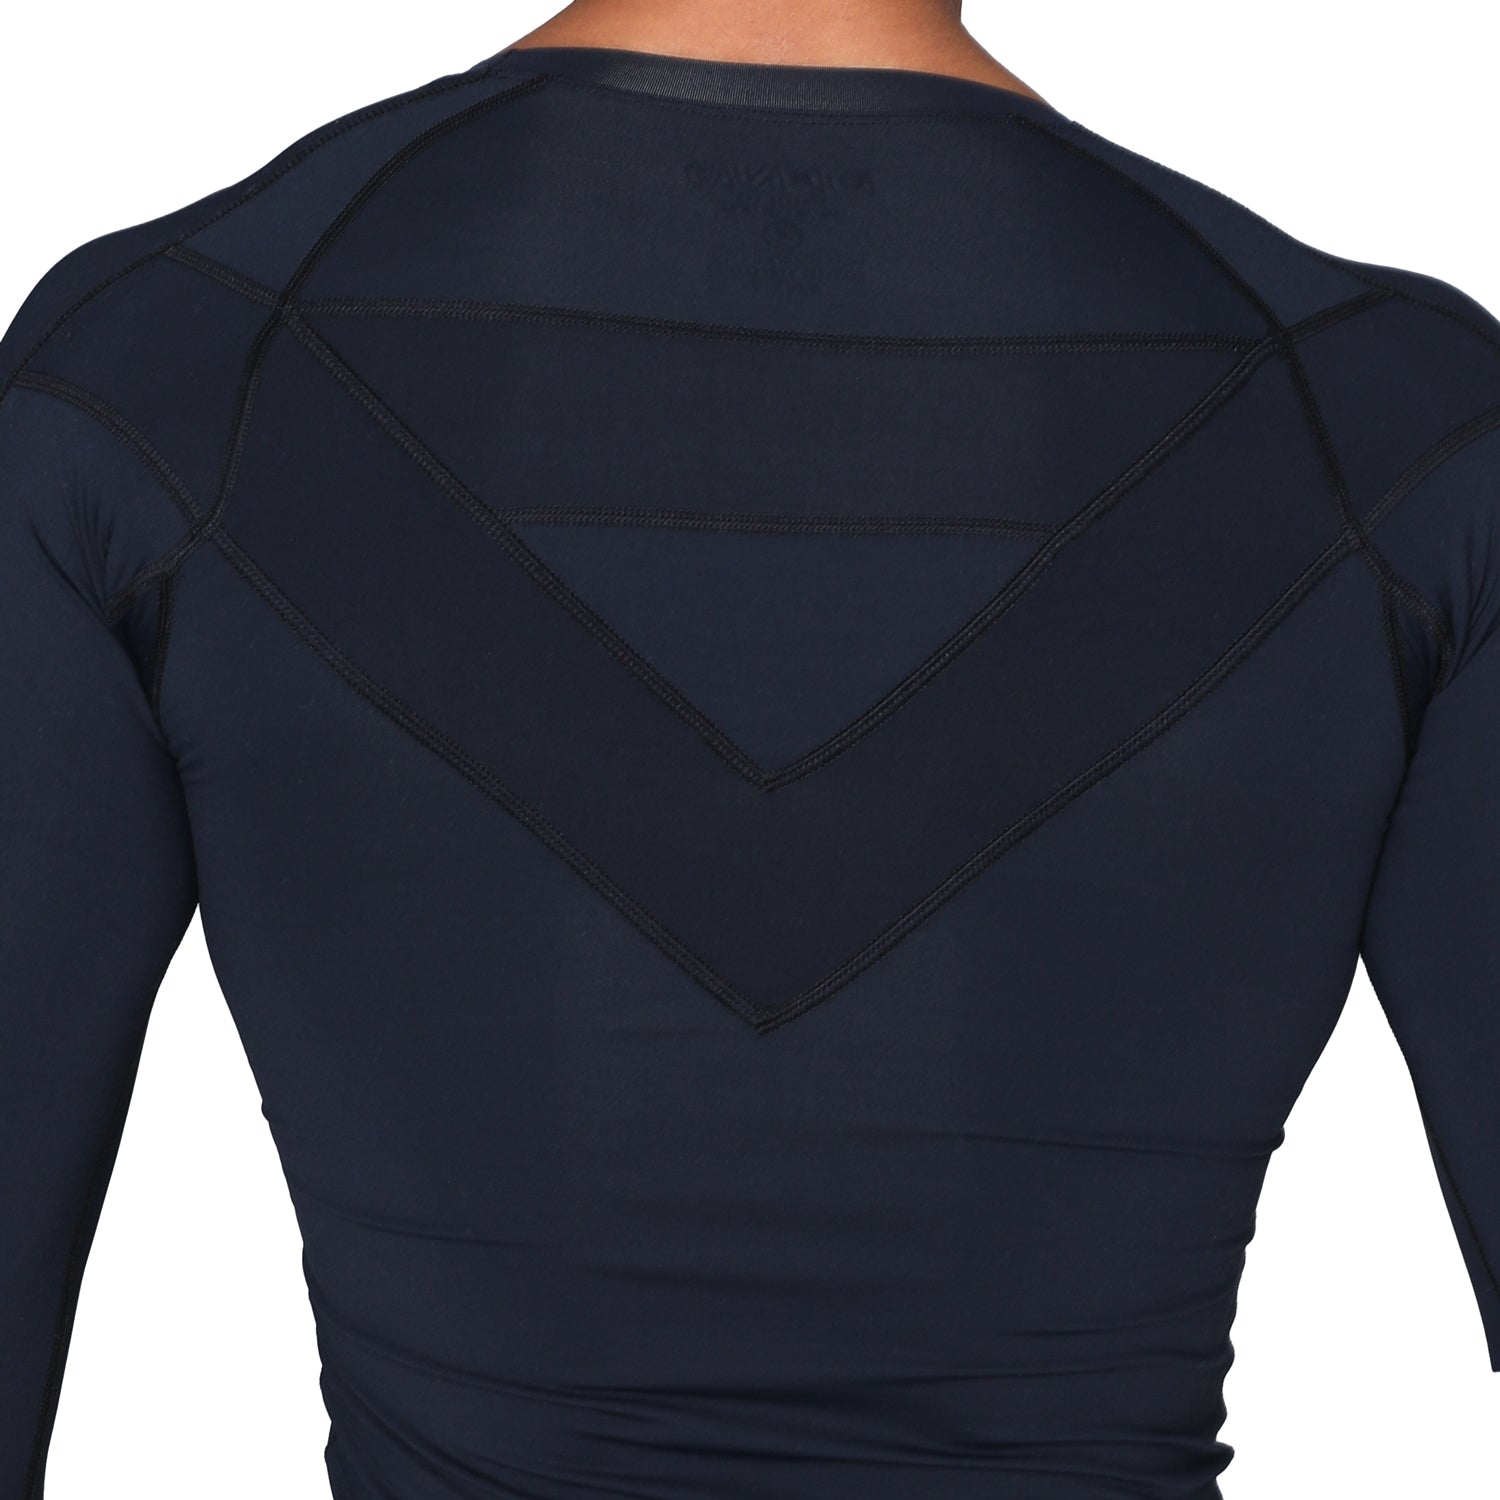 New 2XU Women Refresh Recovery Compression Long Sleeve Top Black